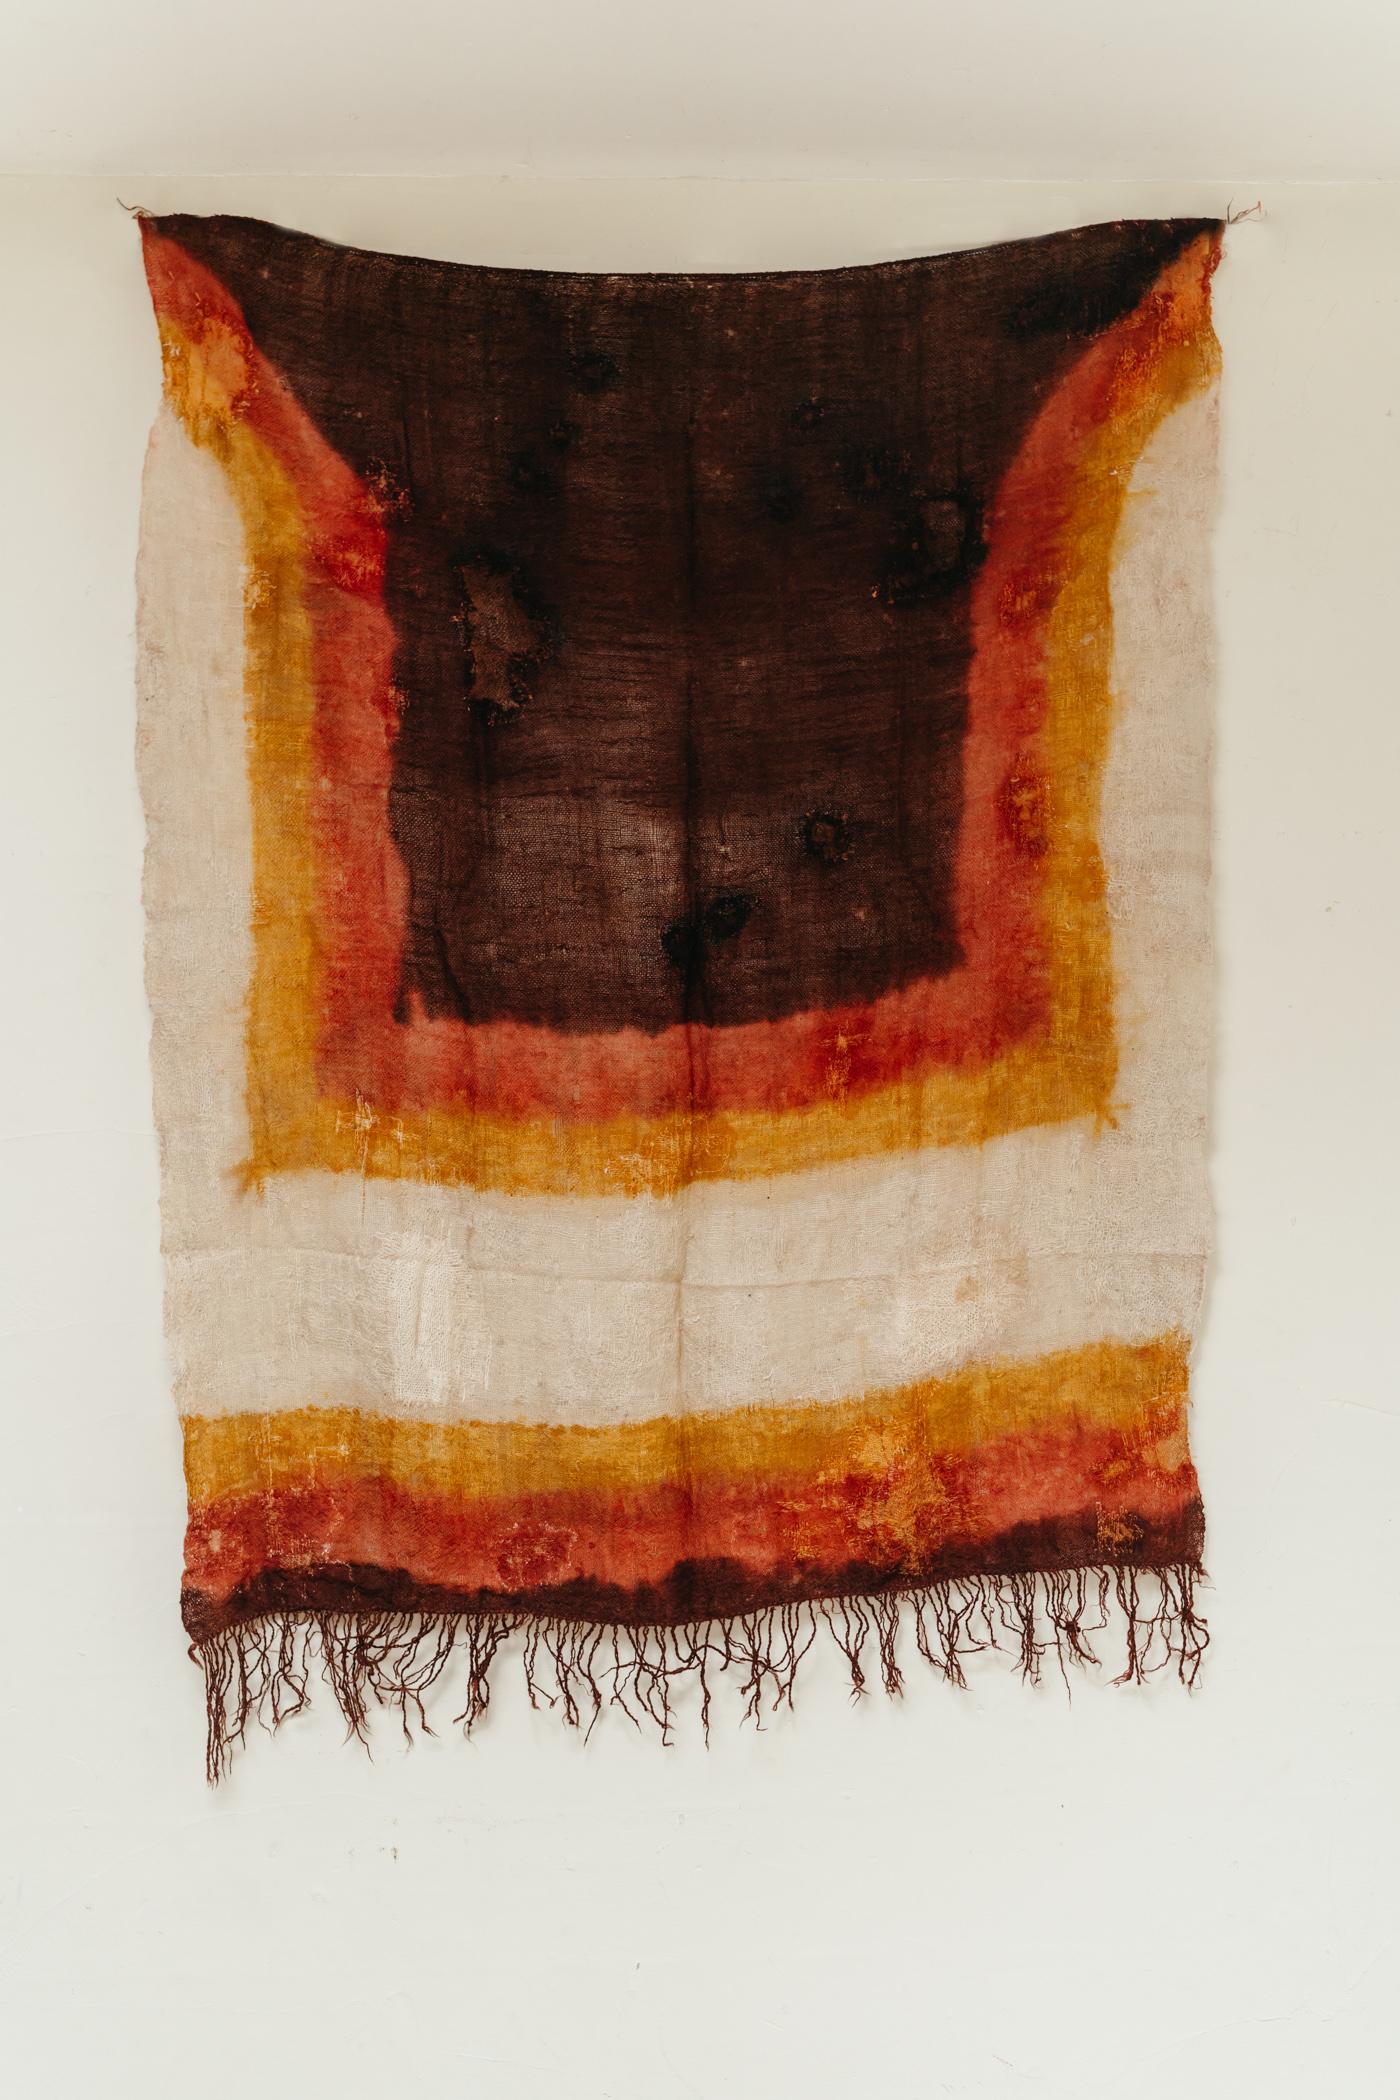 A very rare find this mid 19th century unique berber scarf, sublime natural dye colors.